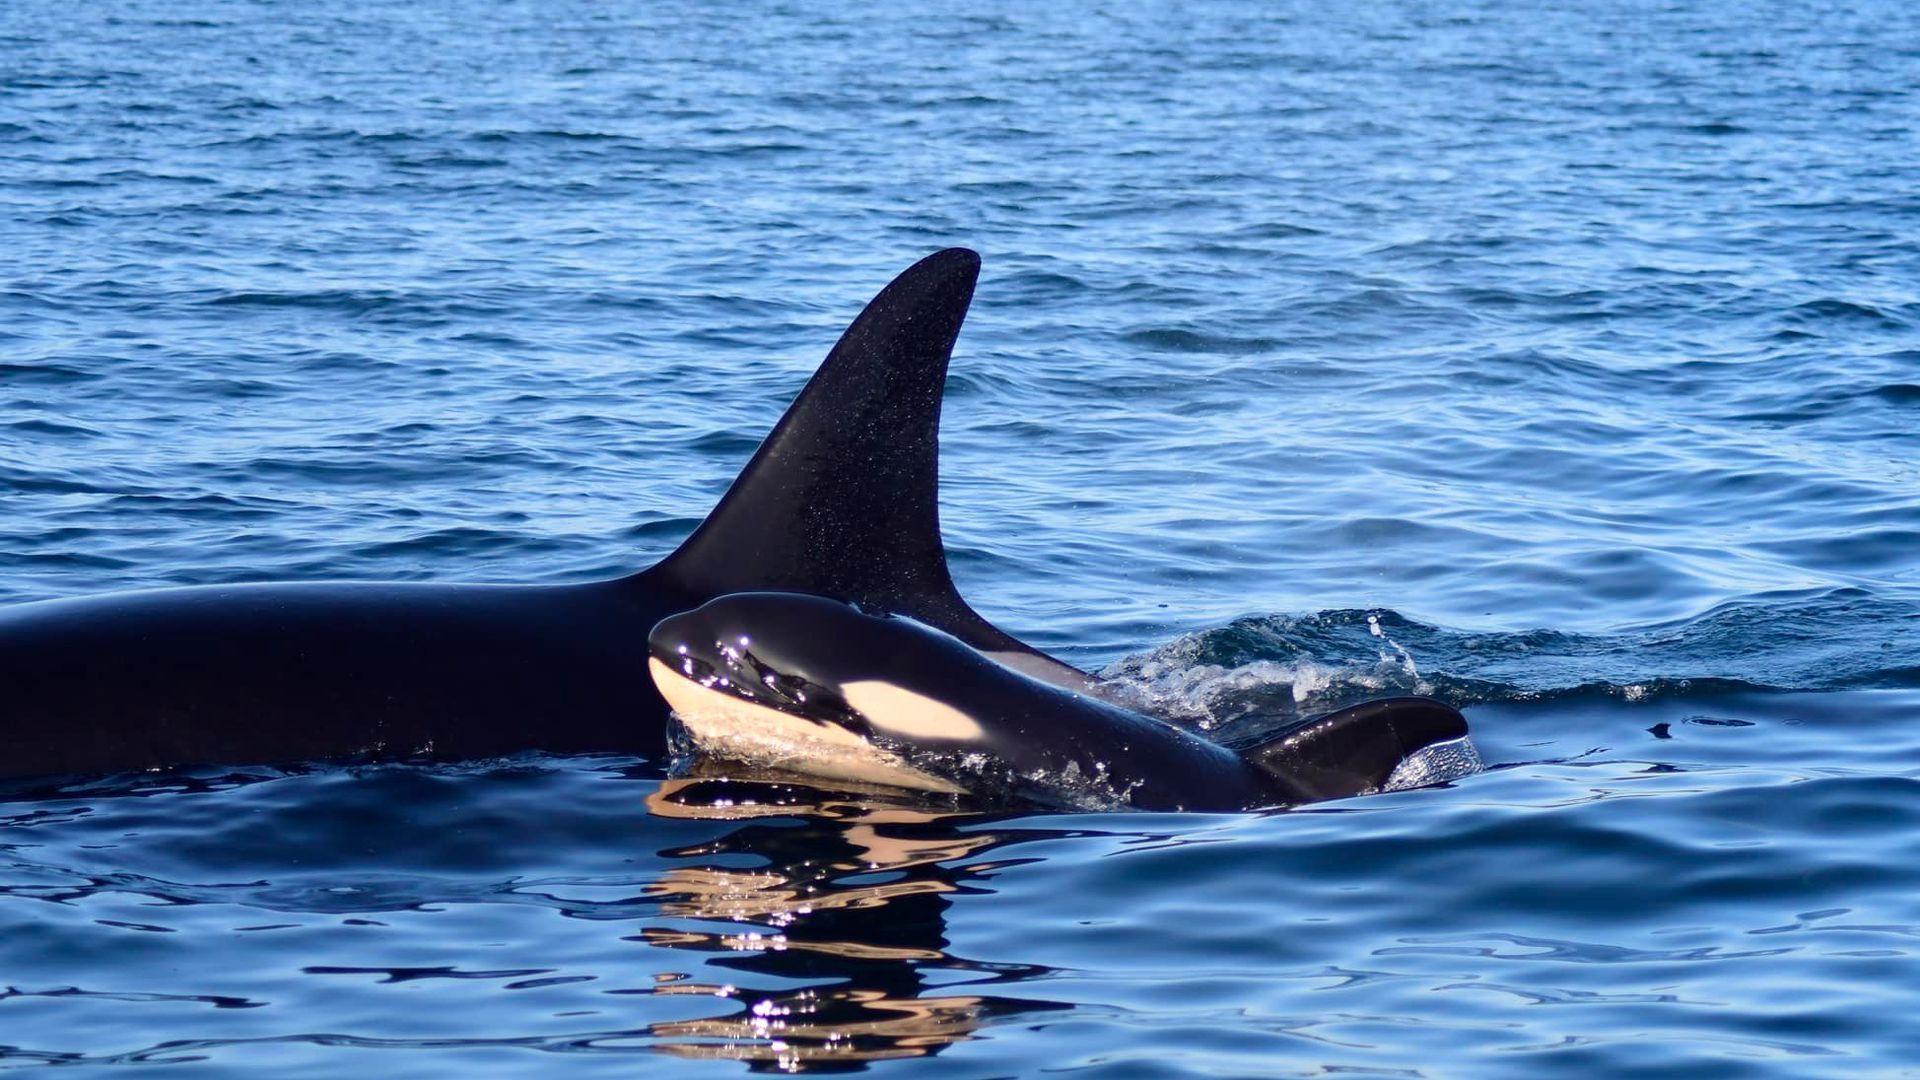 A small orca peeks its head out of the water next to a larger orca whose fin protrudes from the water.